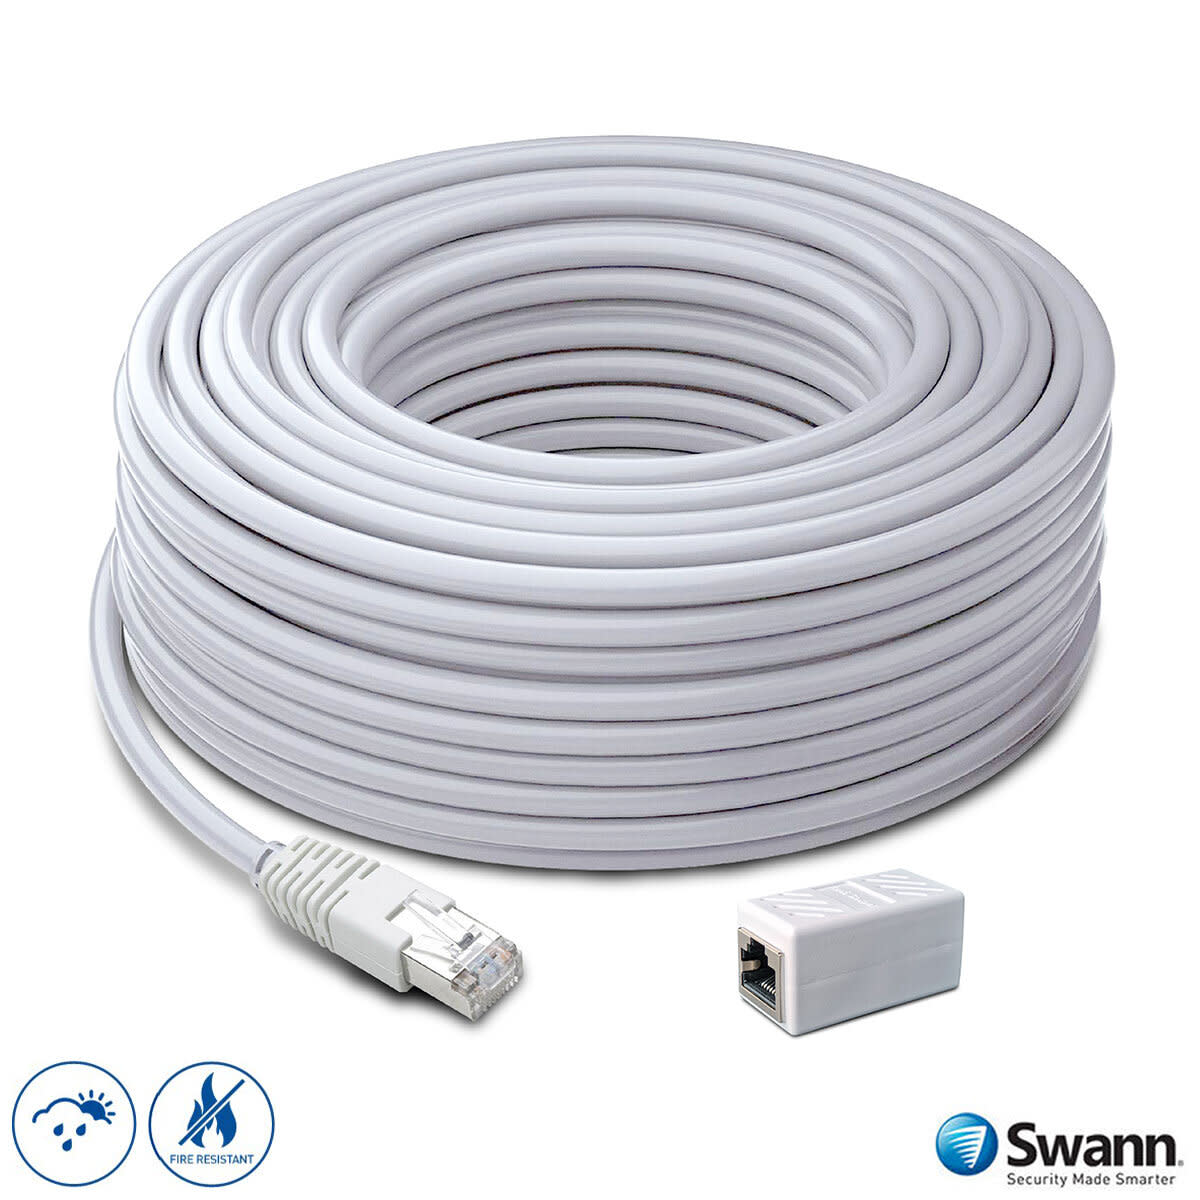 EUK - 200ft/60m Network Extension Cable